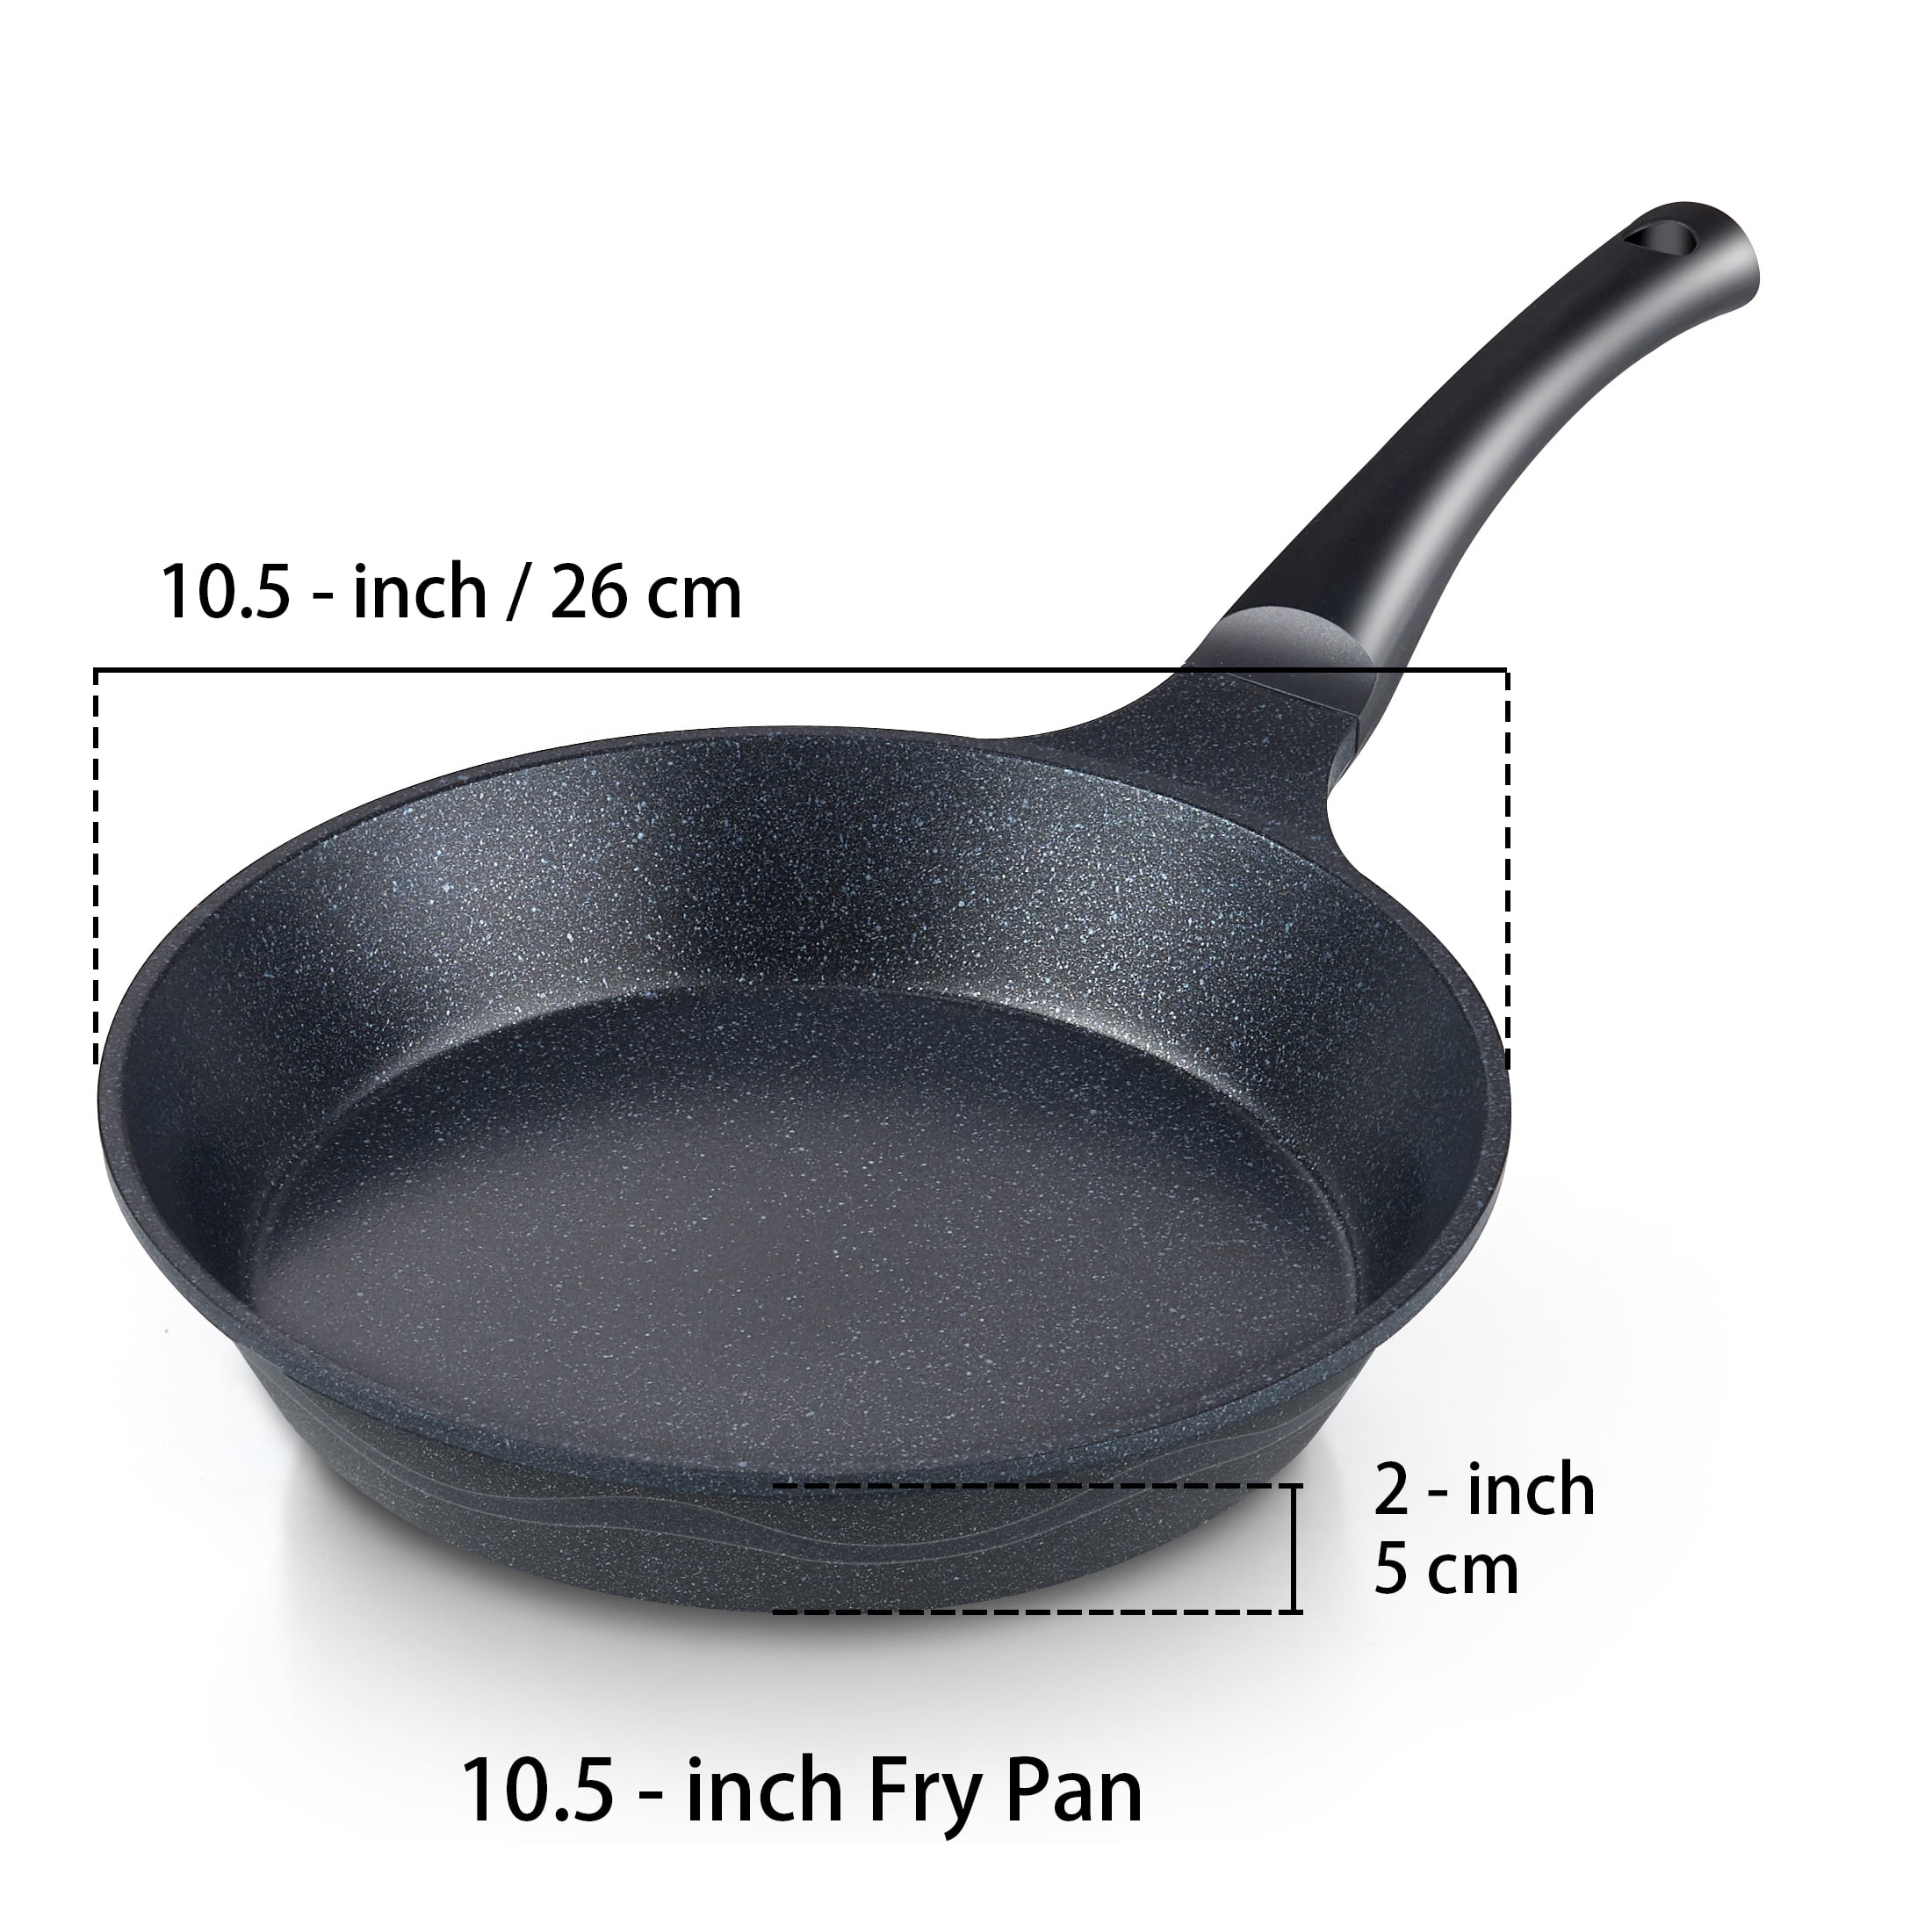 Cook N Home Marble Nonstick Saute Stir Fry Wok Pan 12-inch without